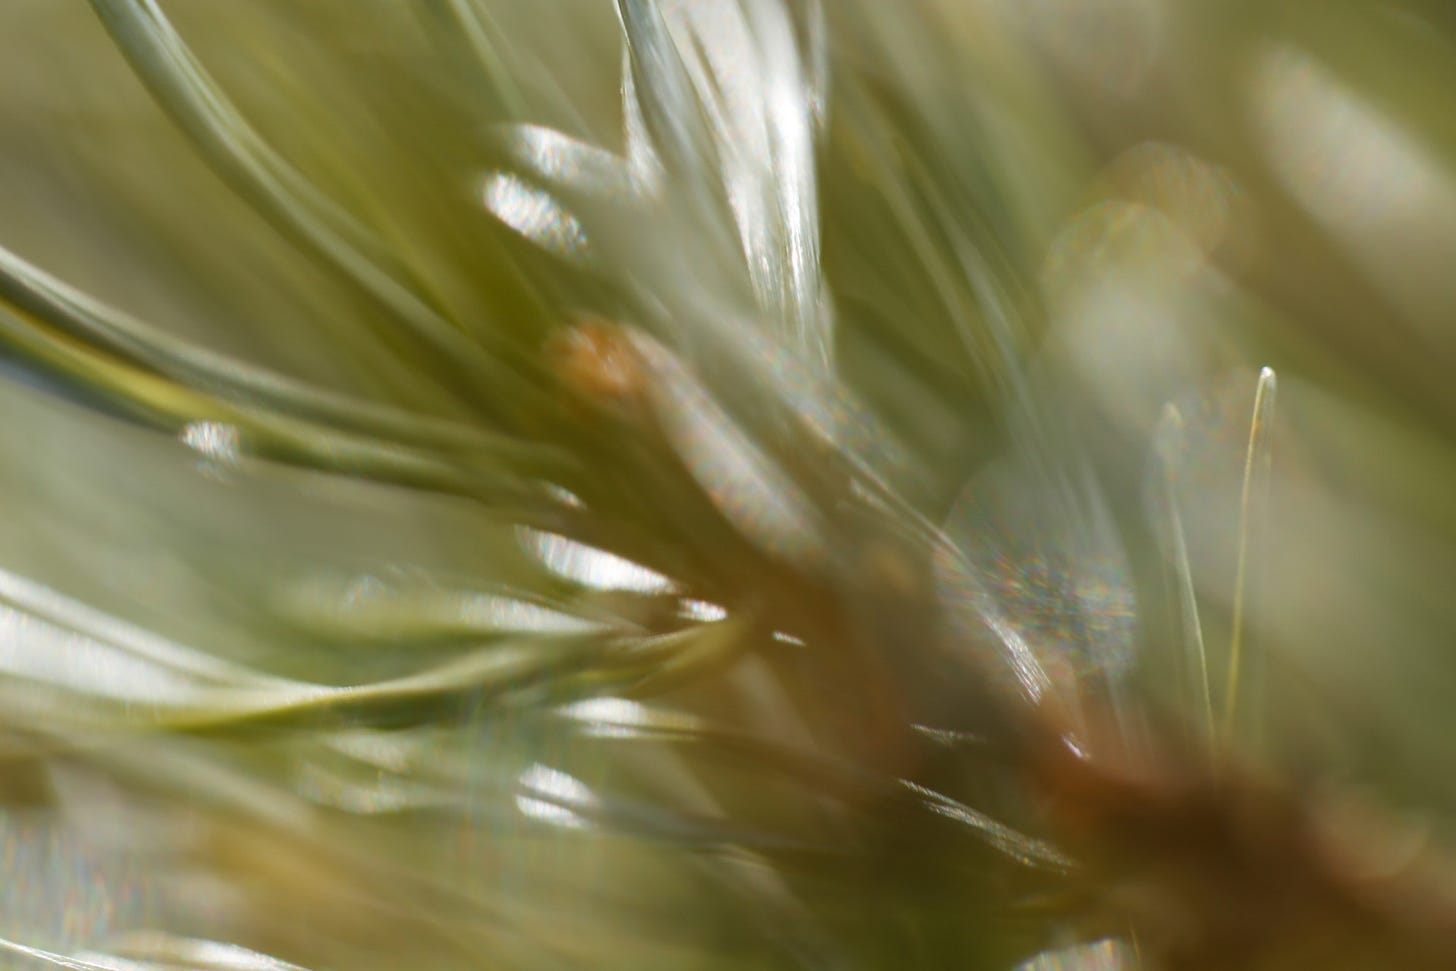 Macro image of fallen Scots pine branch at f/2.8 - a fluid greenery in the wet wood